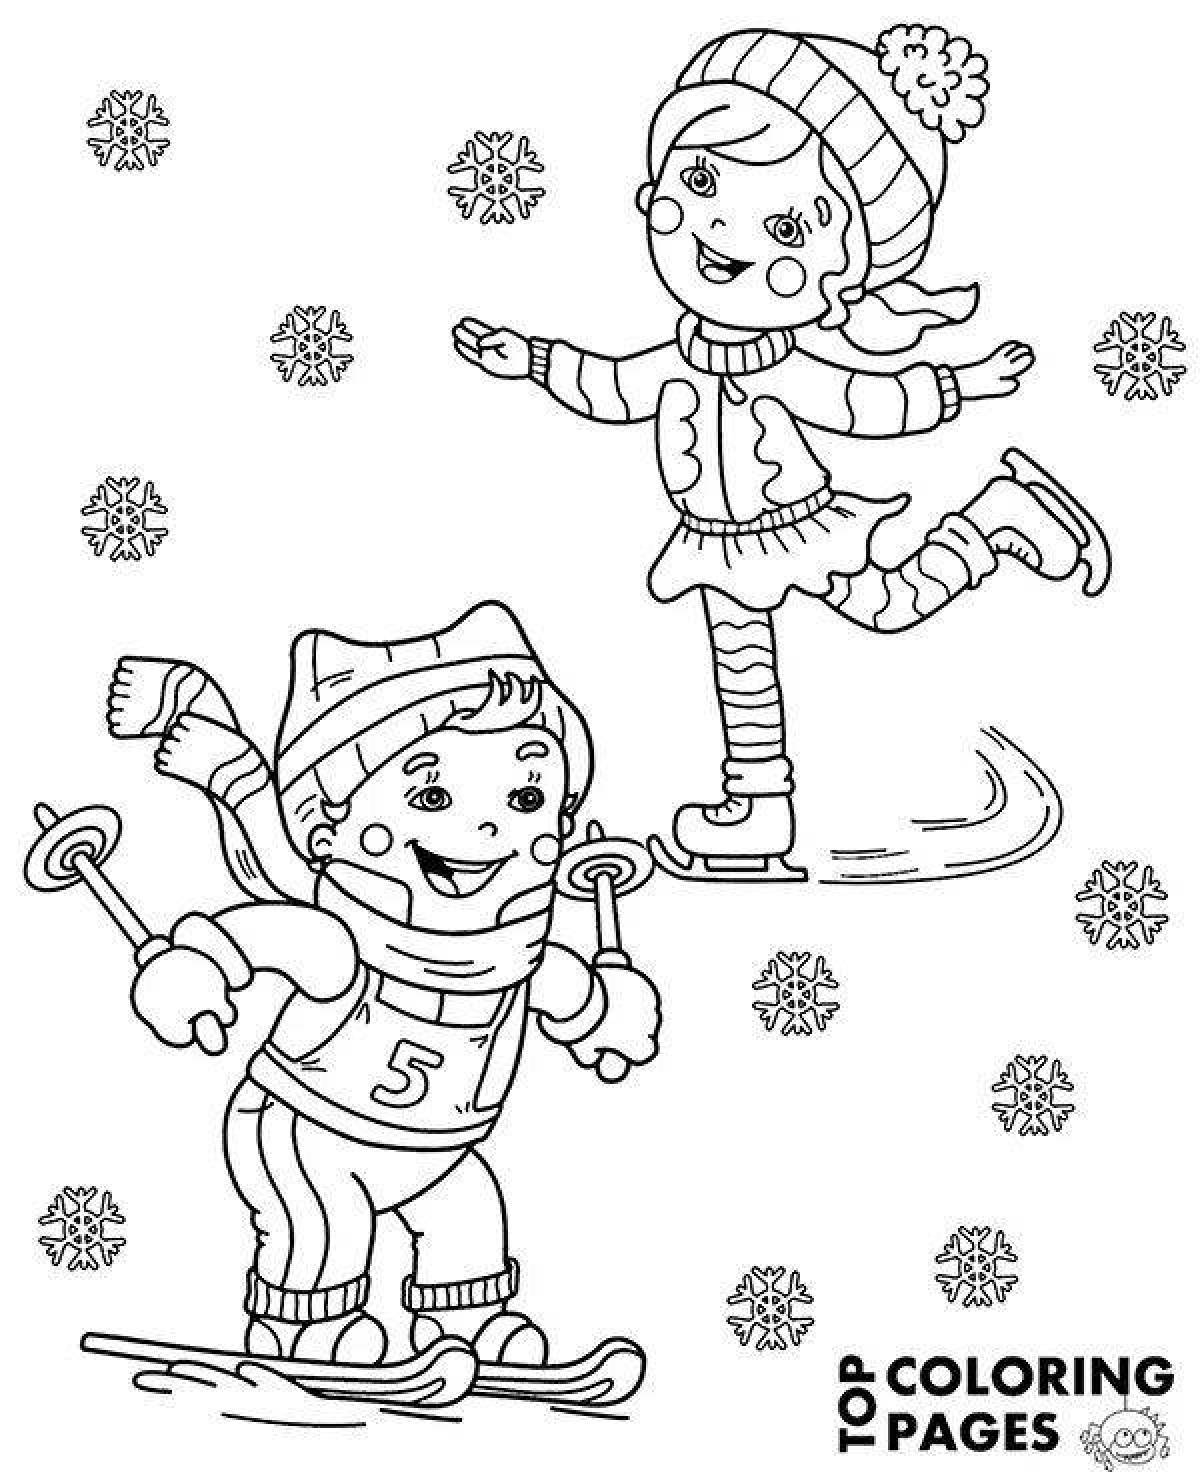 Playful winter sports coloring page for 4-5 year olds